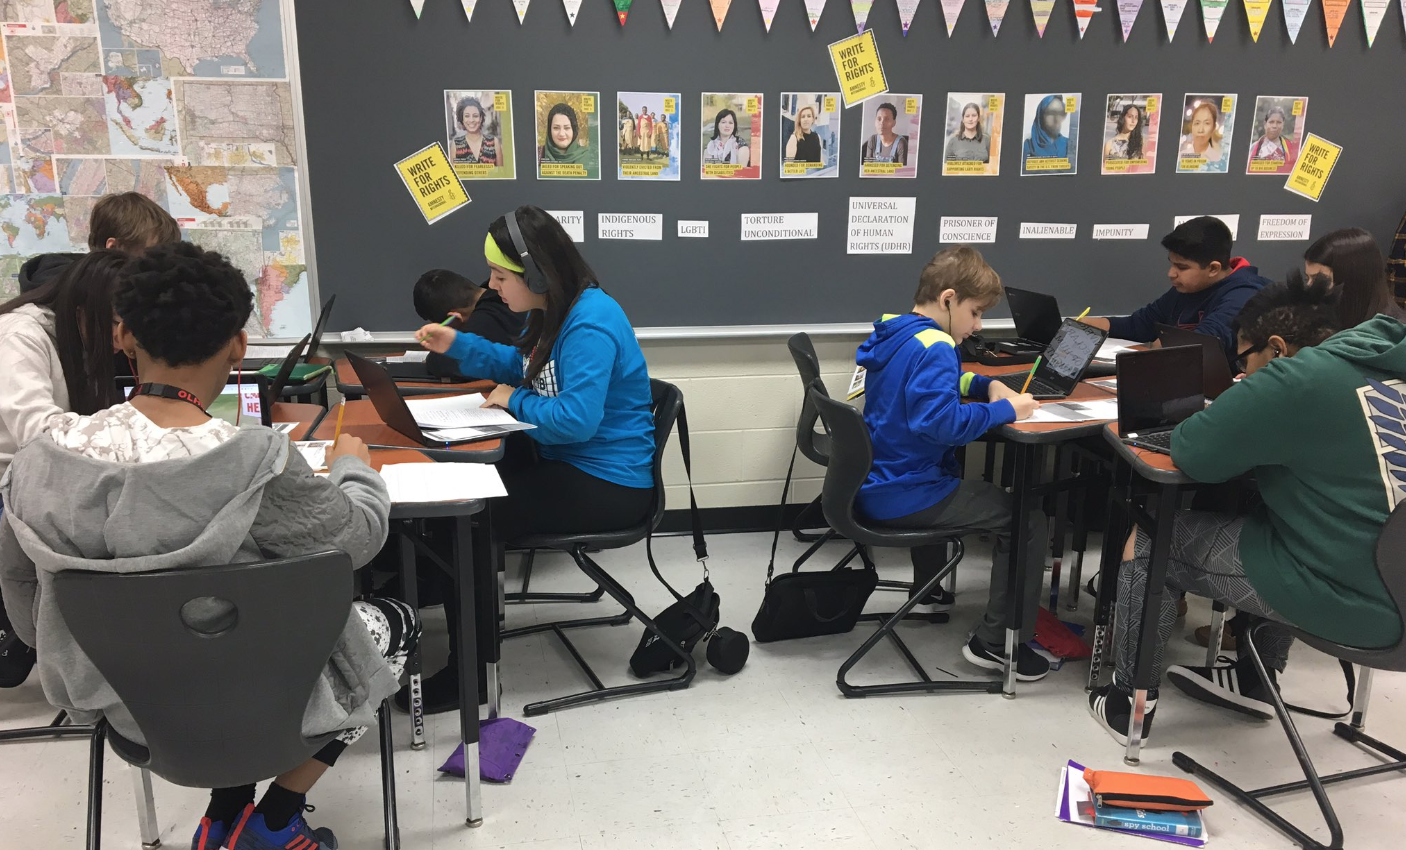 OLHMS students write letter for the Write for Rights campaign by Amnesty International